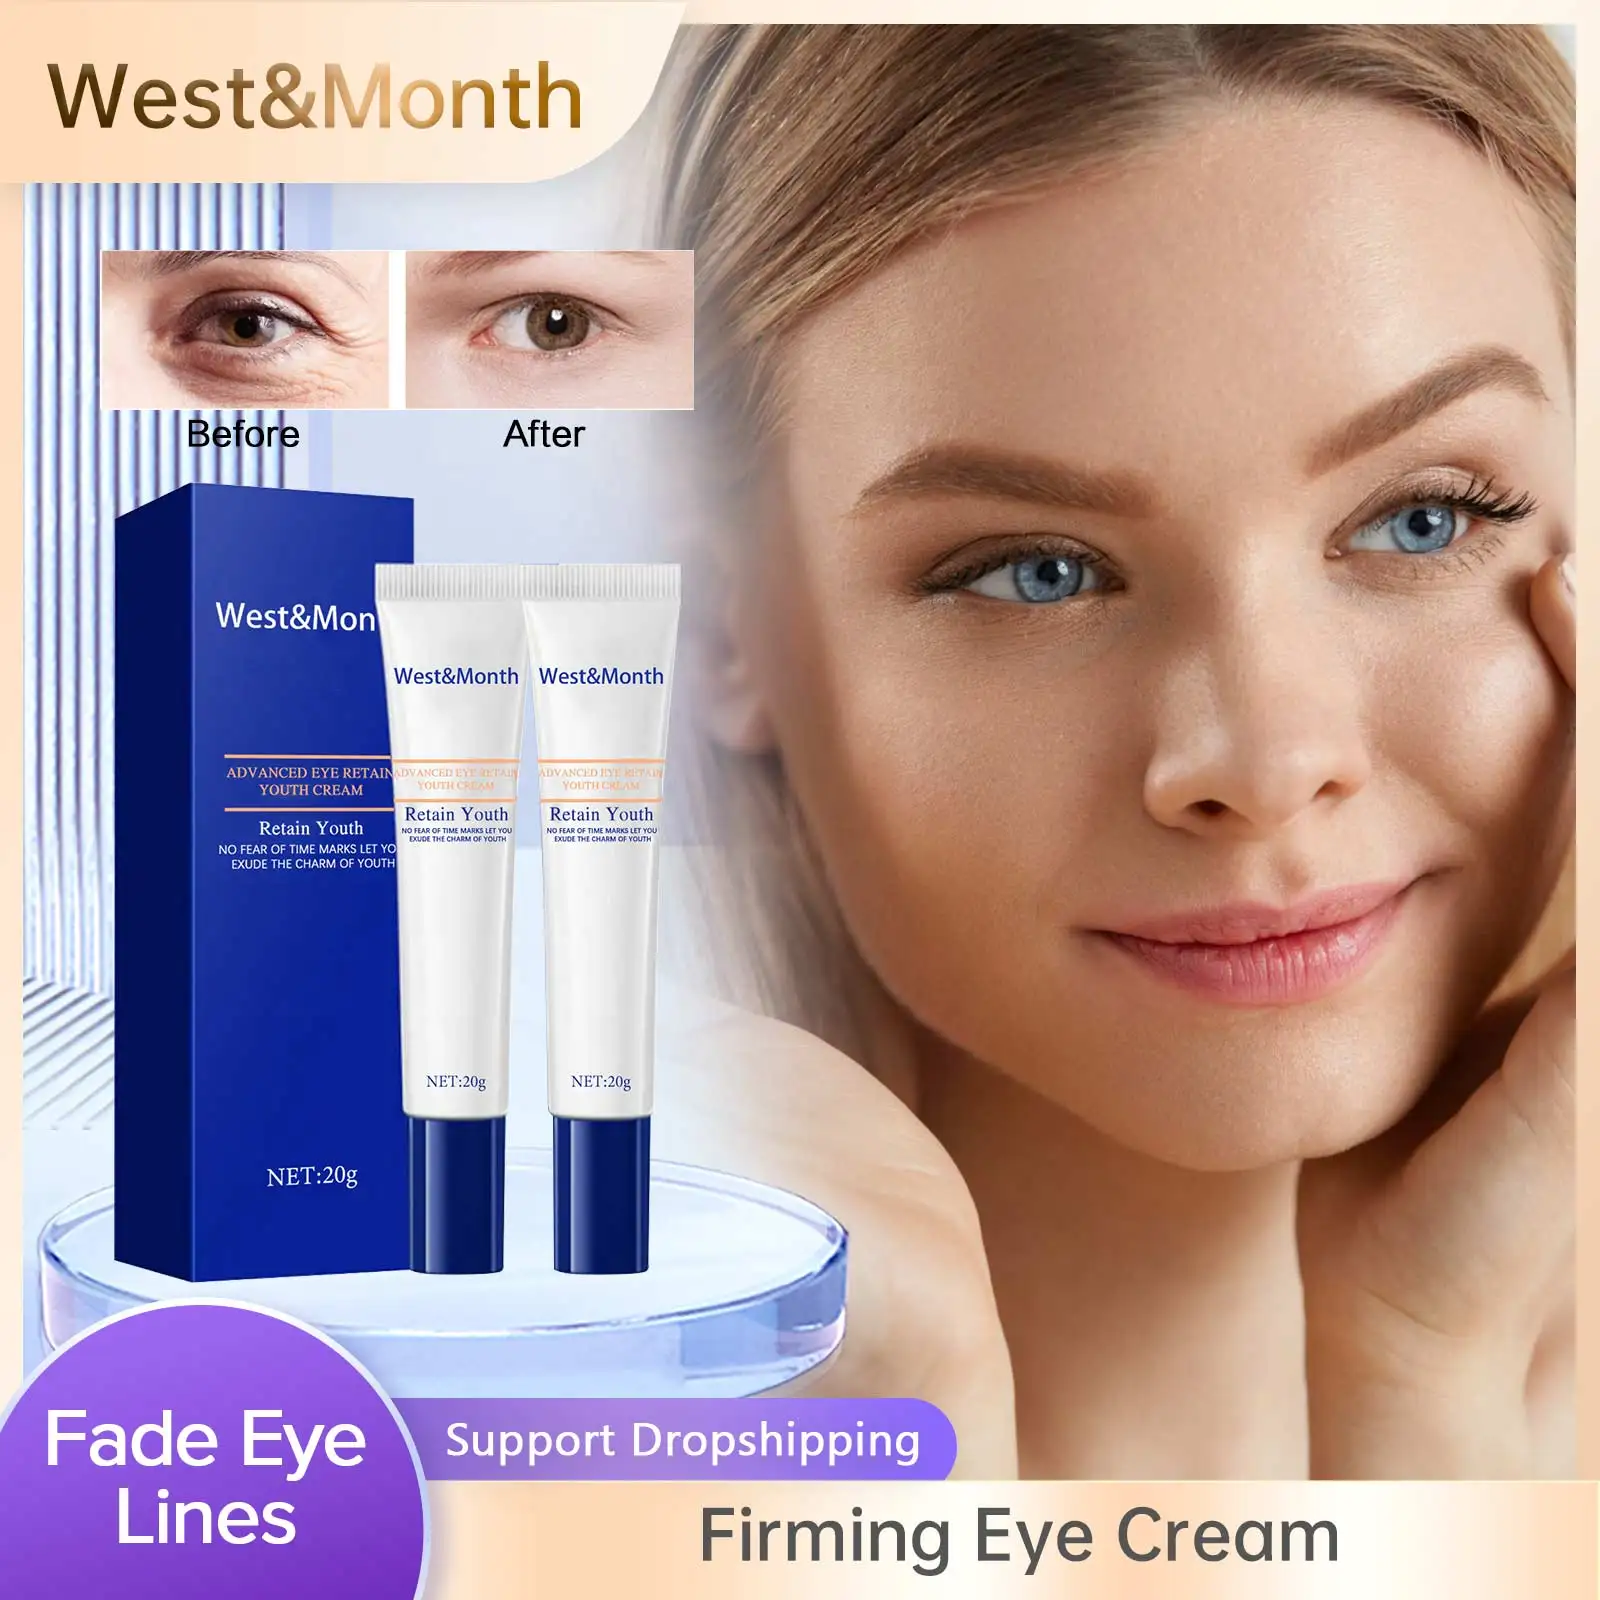 

Firming Eye Cream Fade Fine Lines Dark Circles Removal Eye Bags Puffiness Reduce Wrinkles Anti-Aging Smooth Brighten Skin Care